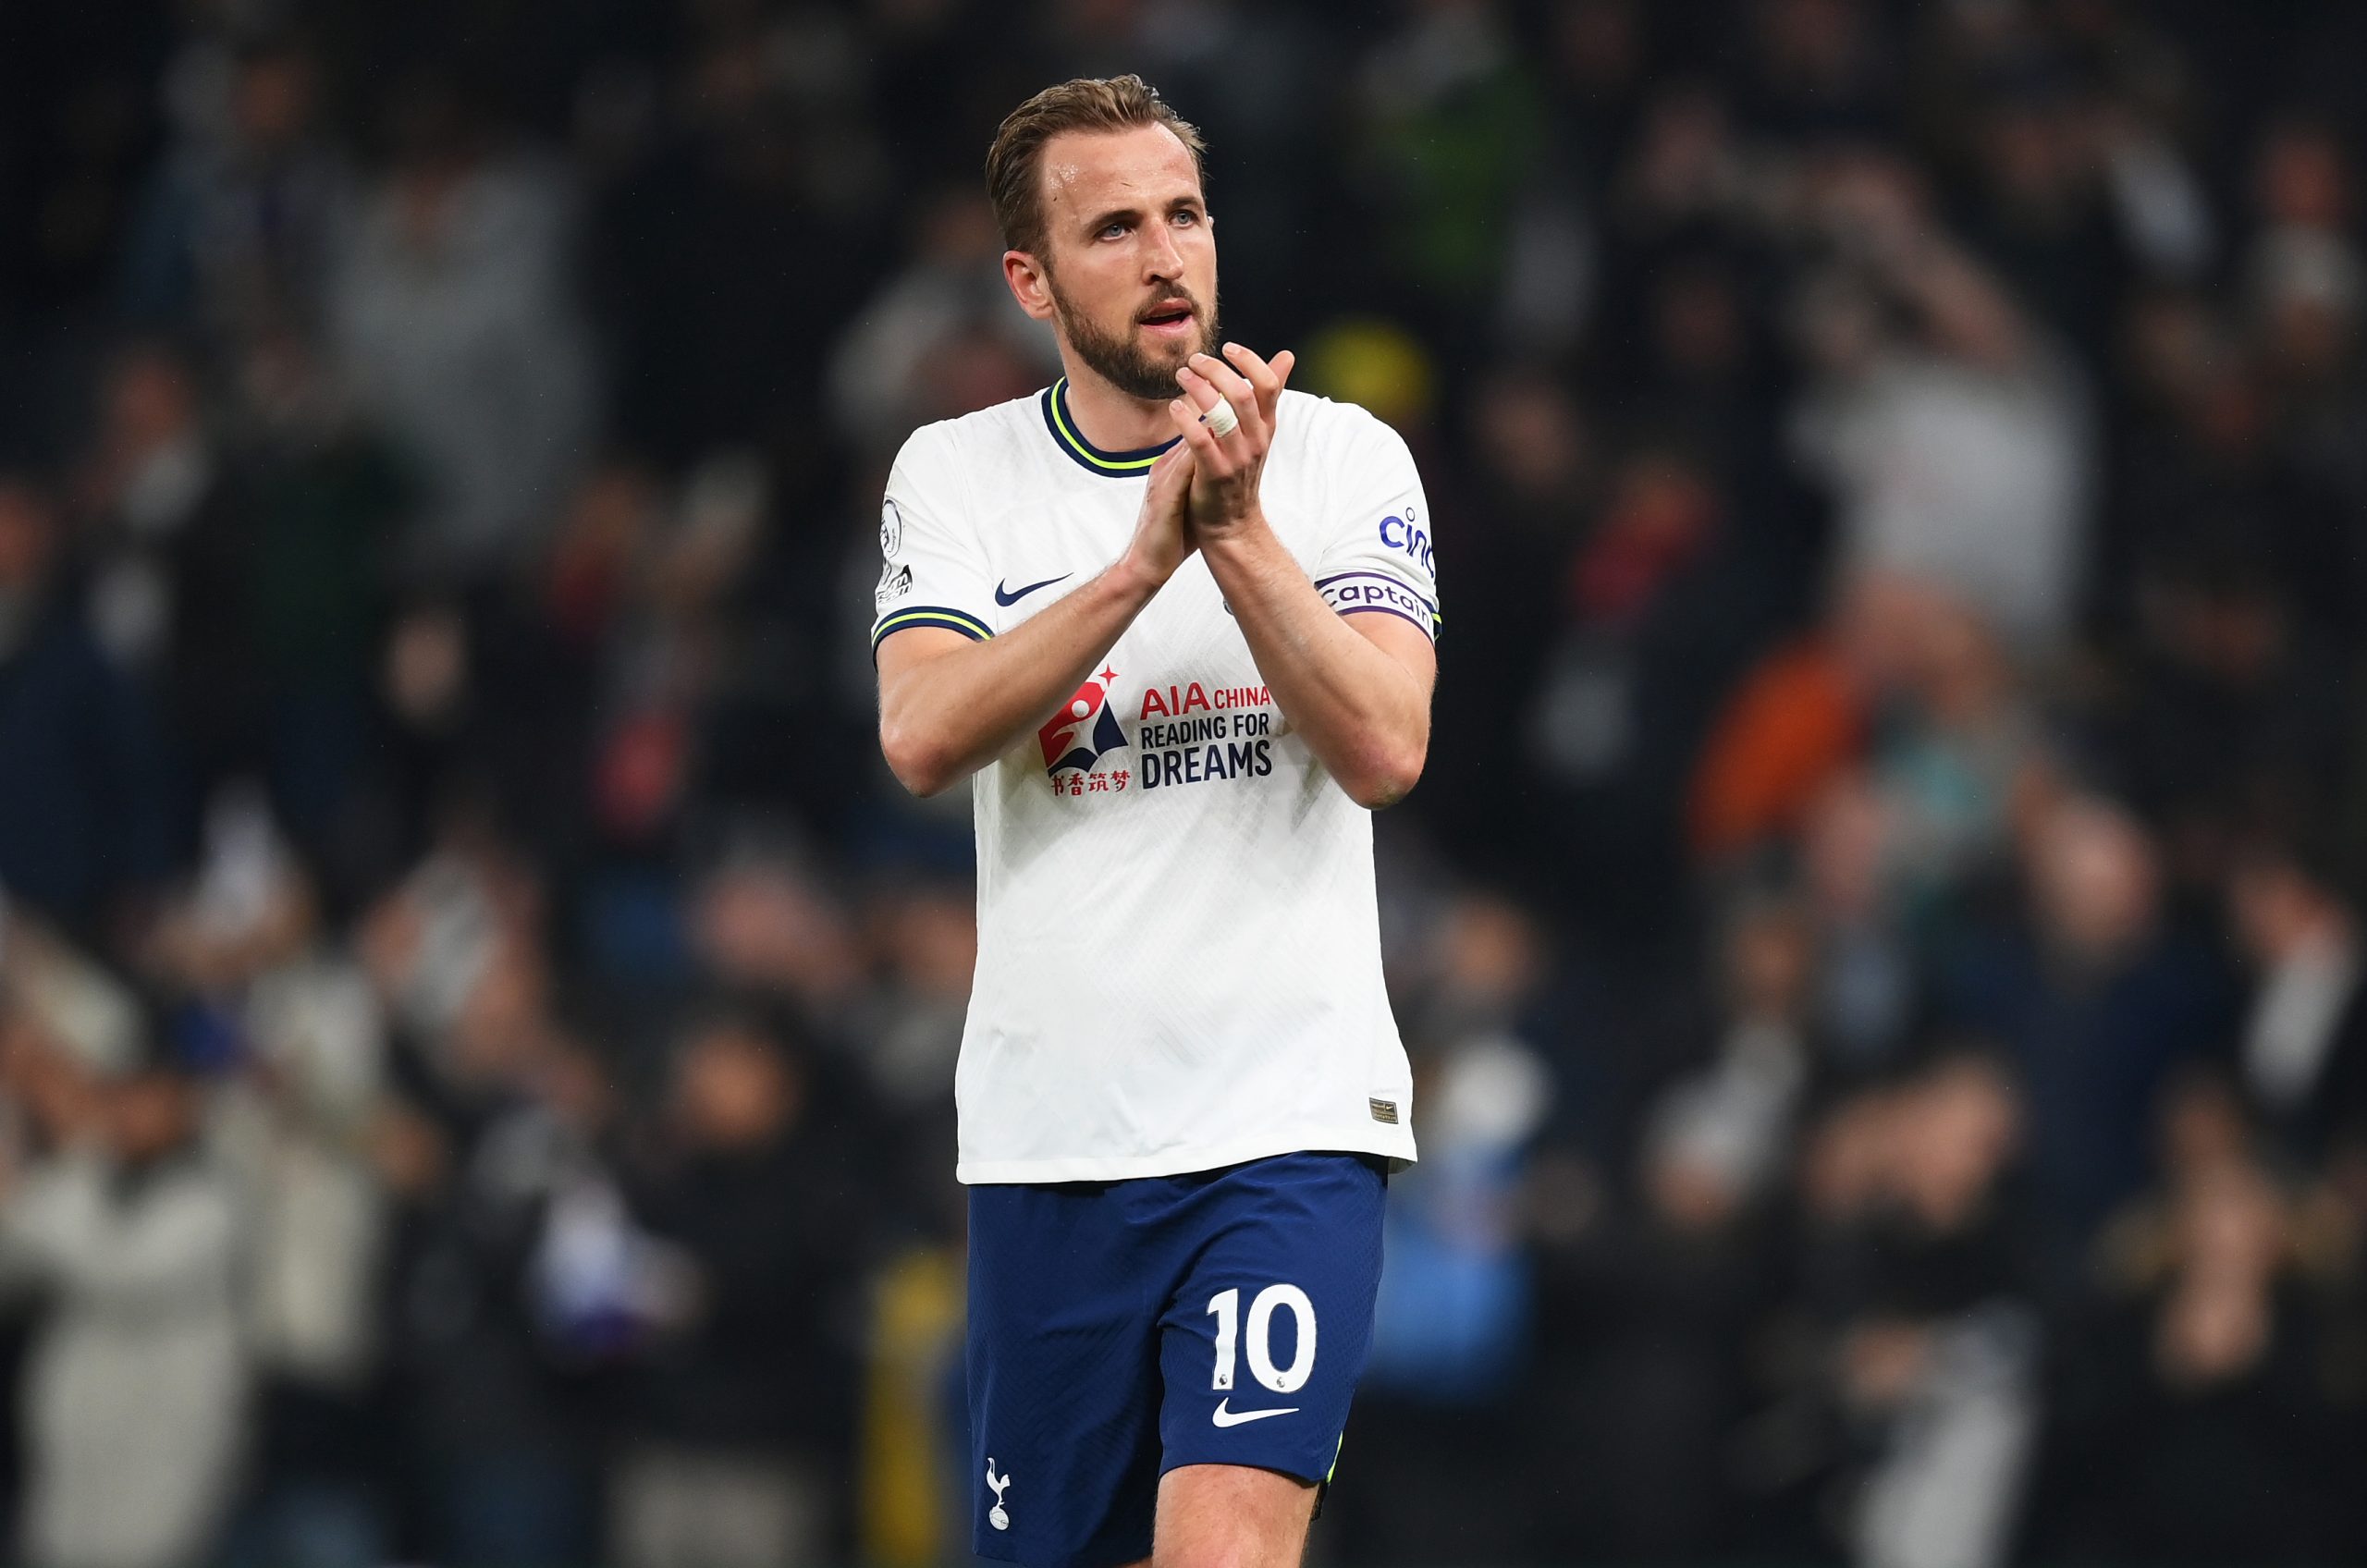 Stuart Pearce believes Harry Kane has made his final appearance for Tottenham Hotspur.